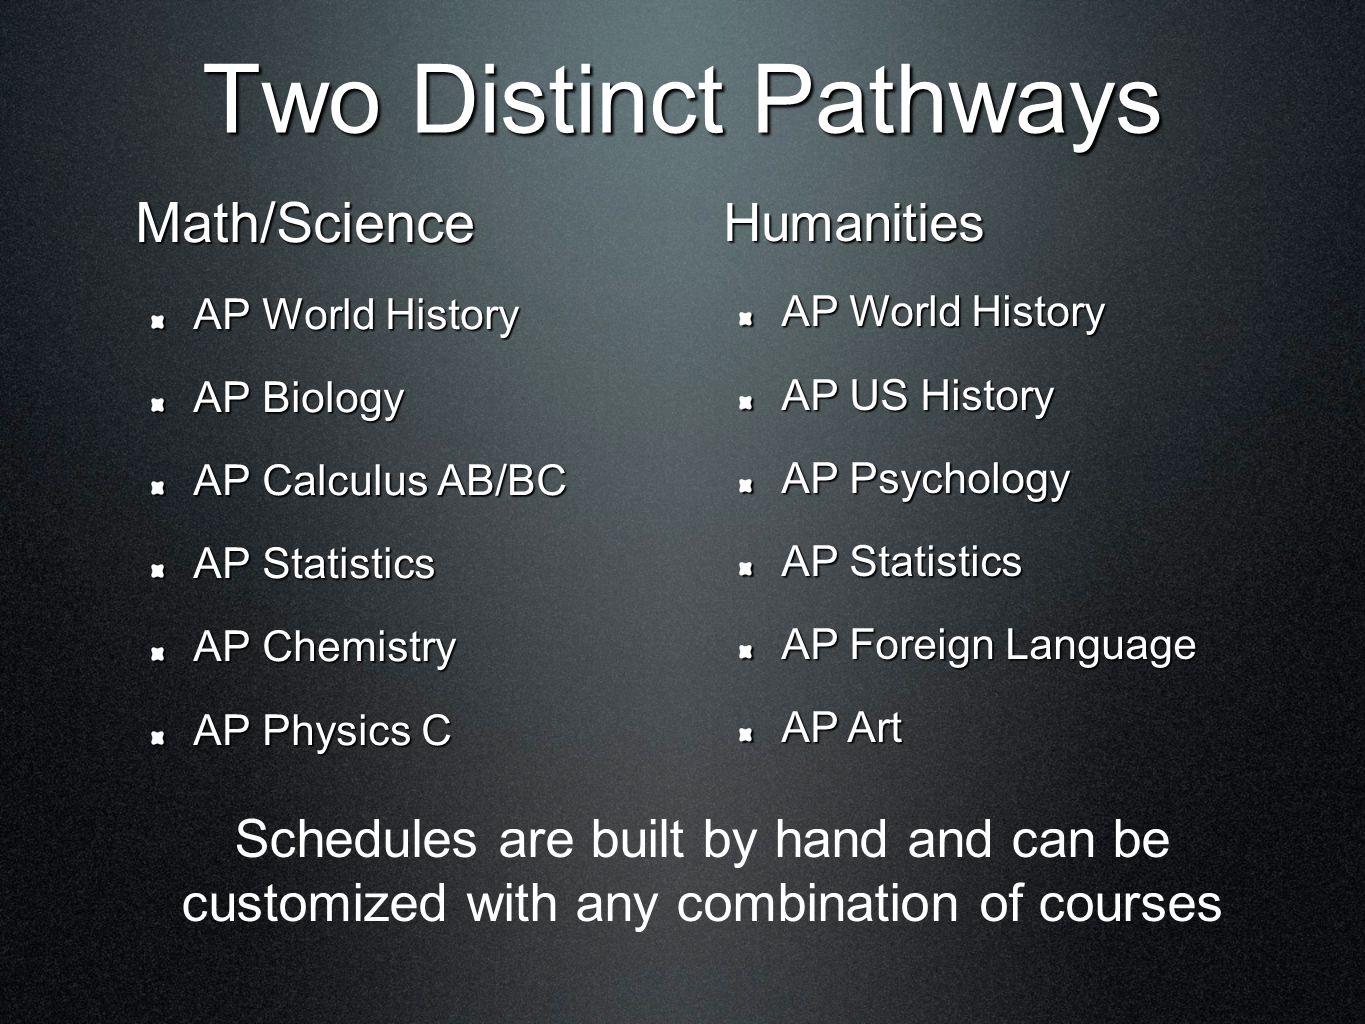 Two Distinct Pathways Math/Science AP World History AP Biology AP Calculus AB/BC AP Statistics AP Chemistry AP Physics C Humanities AP World History AP US History AP Psychology AP Statistics AP Foreign Language AP Art Schedules are built by hand and can be customized with any combination of courses